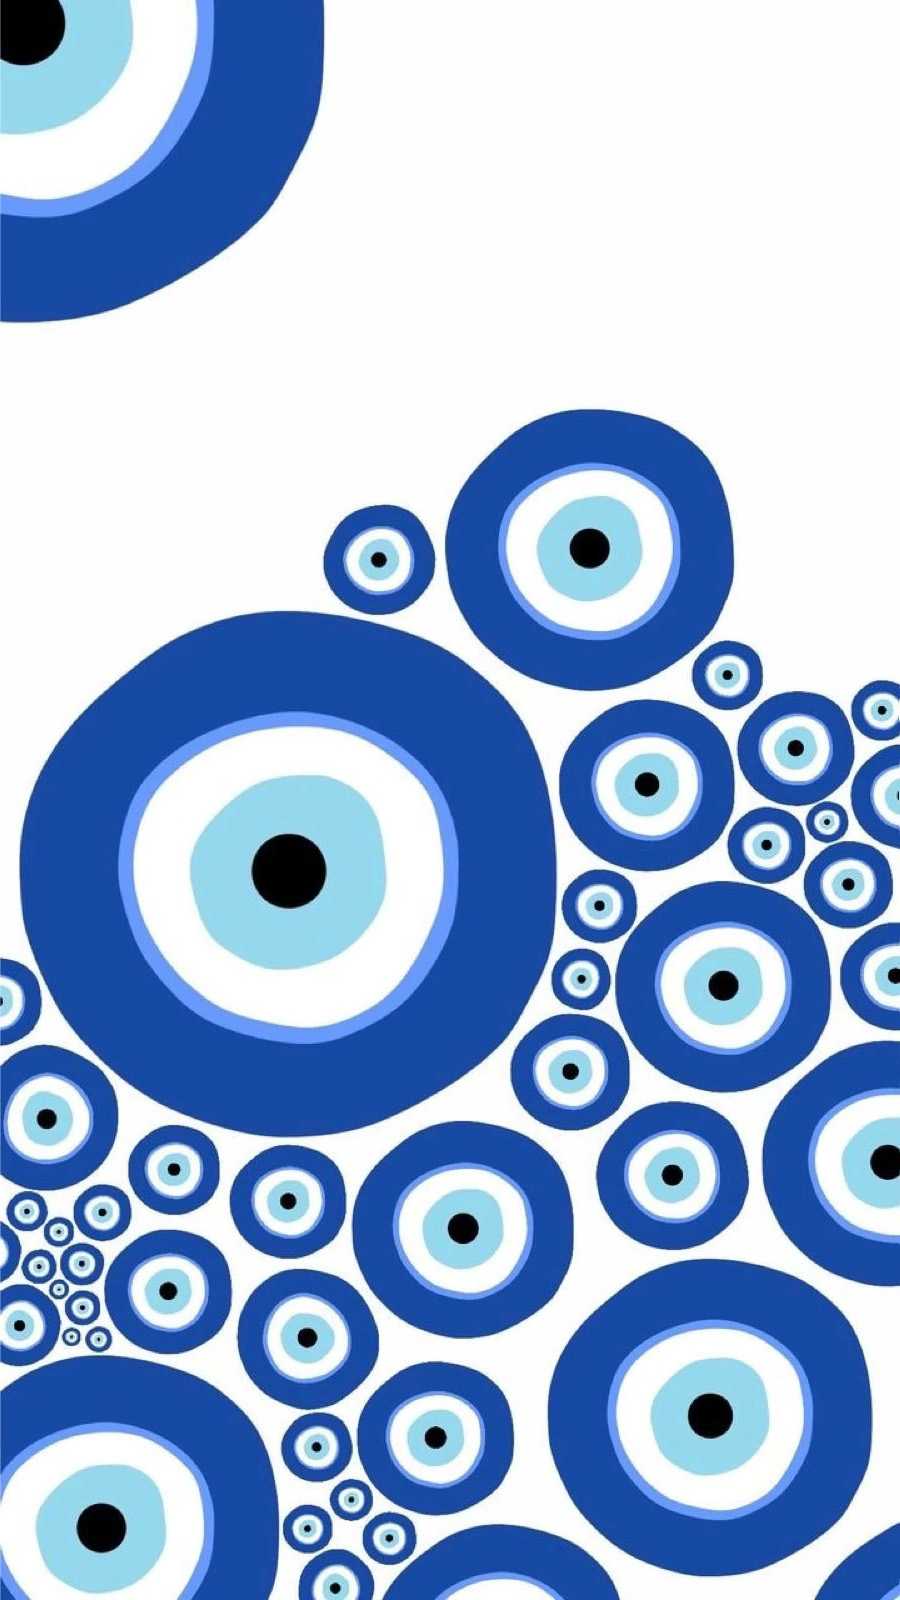 What does the evil eye symbol really mean? - The Washington Post